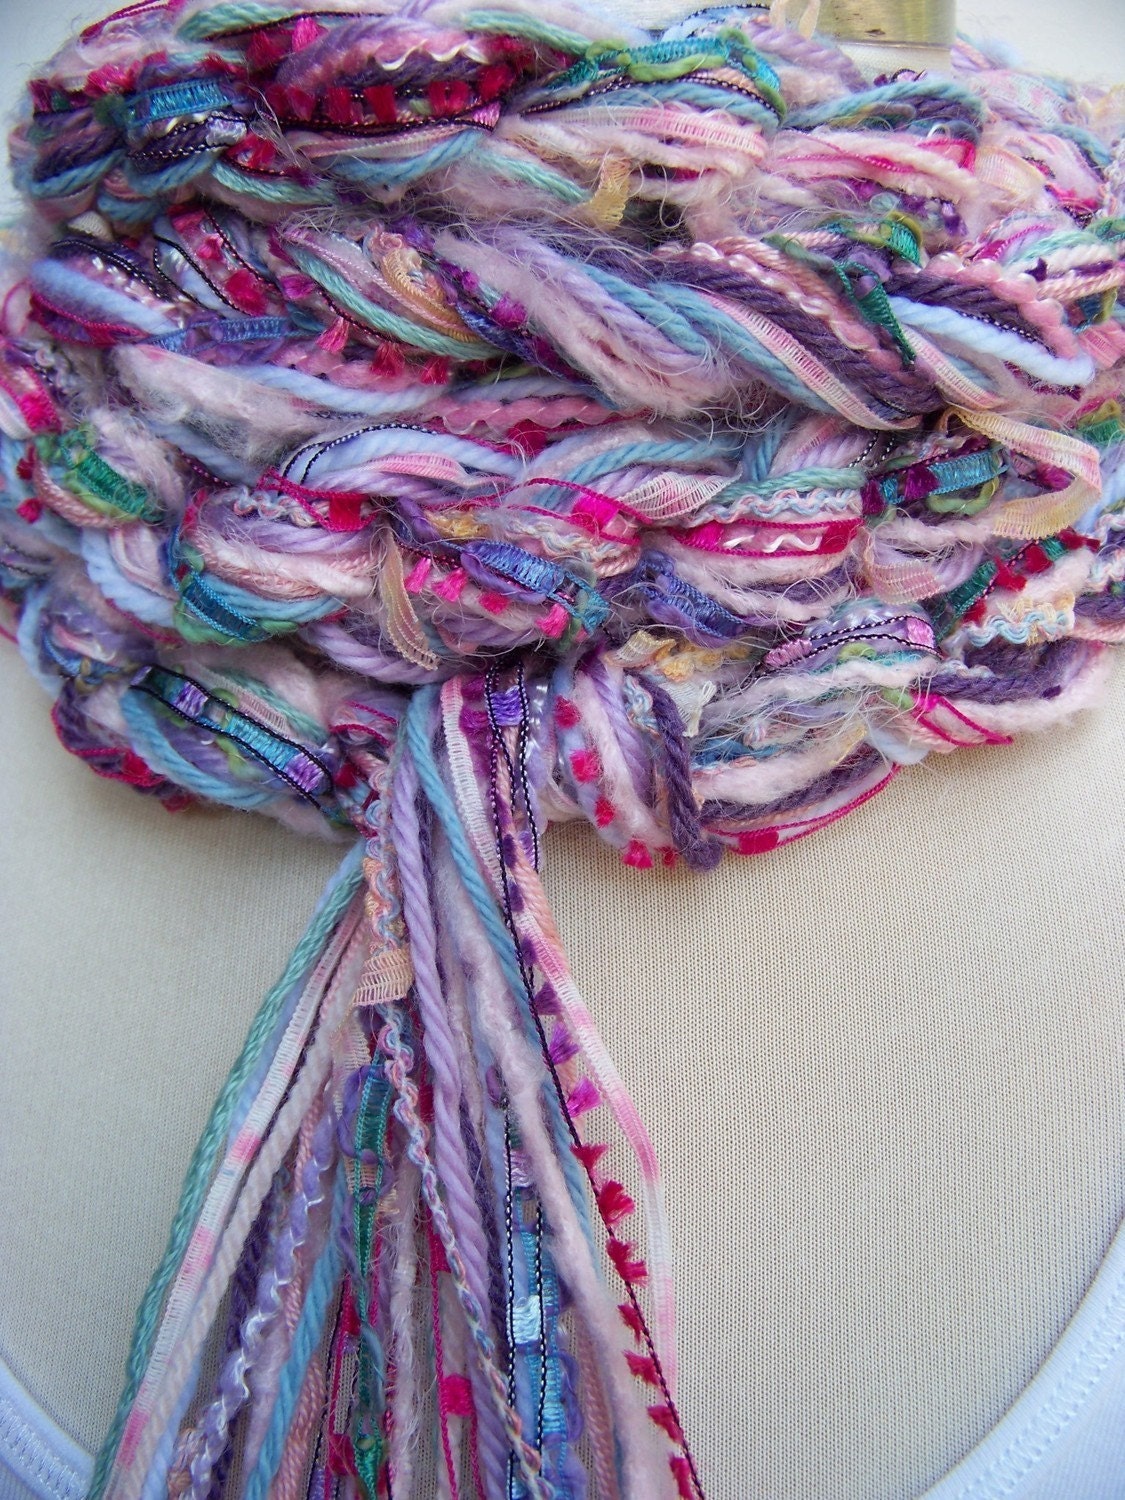 HandKnit Scarf - The Pippy PASTEL Skinny Scarf - Pinks, Teal, Lavendar -  FREE SHIPPING with purchase of 2 or more items